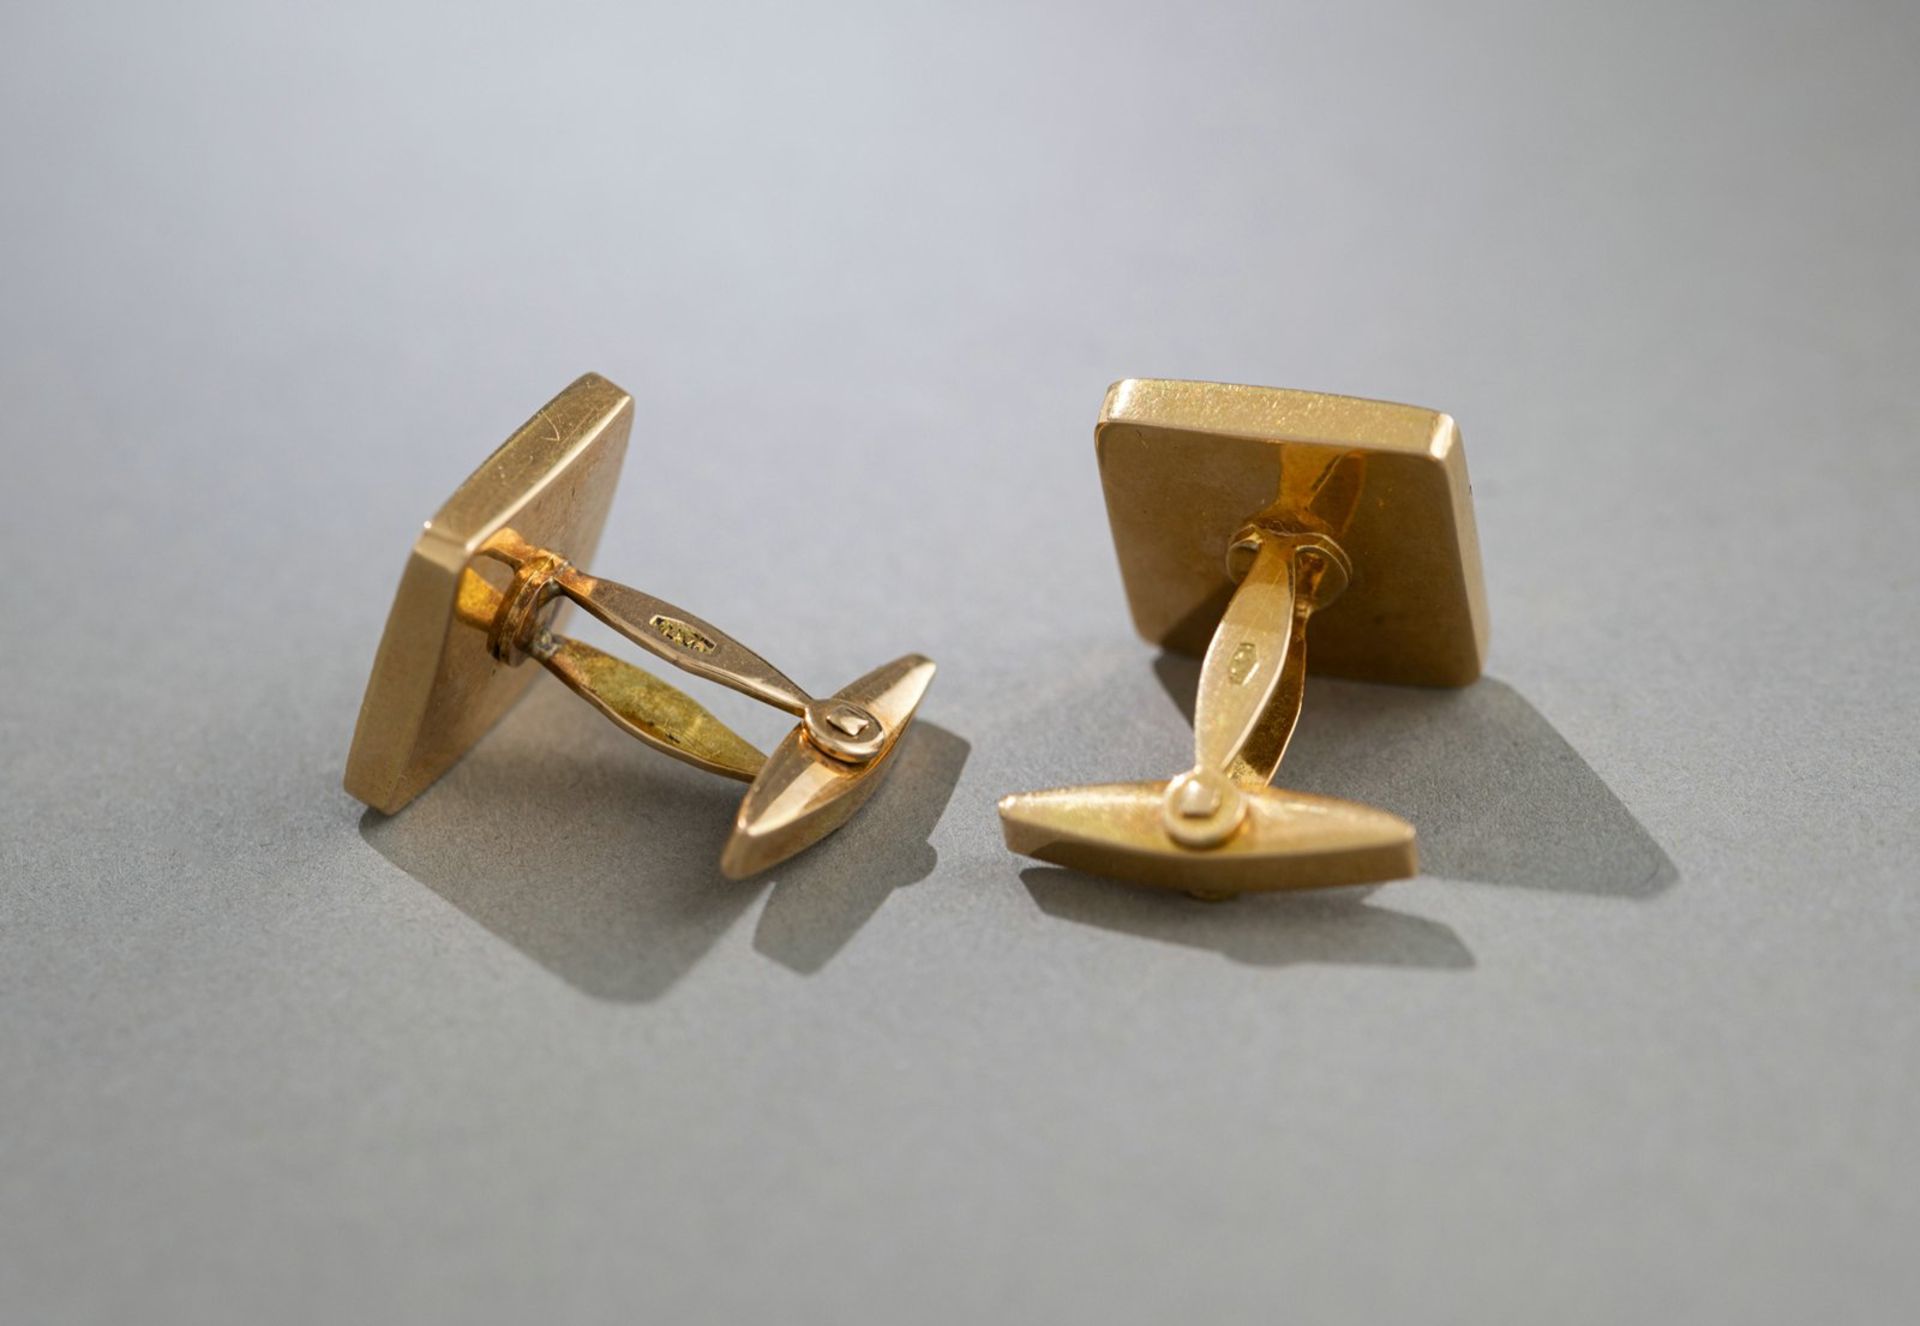 A PAIR OF GOLD CUFF LINKS WITH MONOGRAM - Image 4 of 4